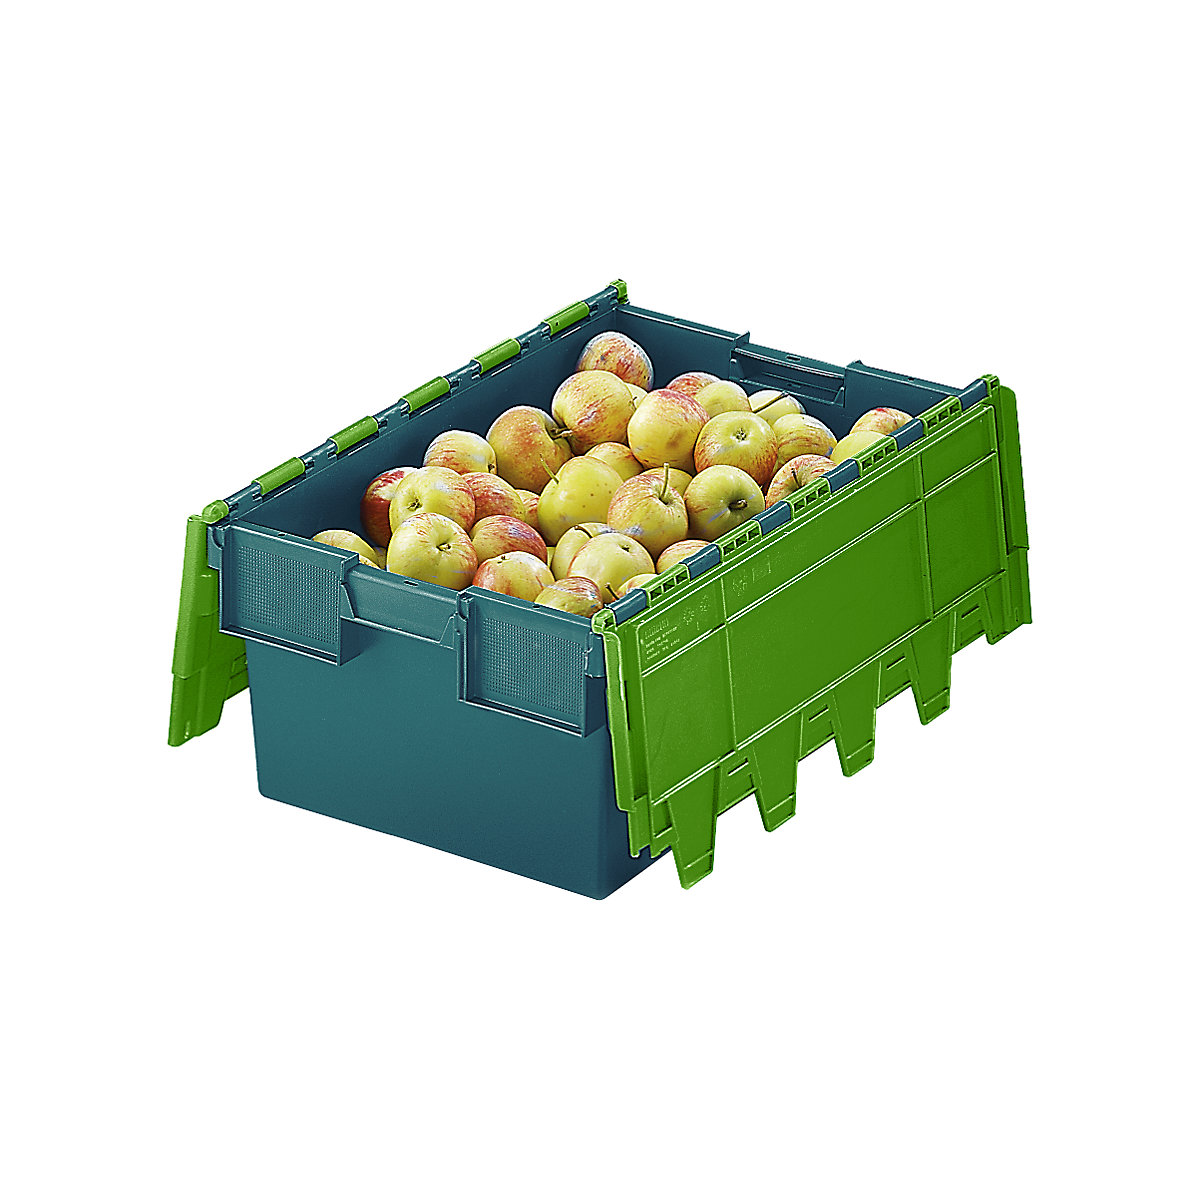 KAIMAN reusable stacking container, capacity 40 litres, LxWxH 600 x 400 x 250 mm, green, 10+ items